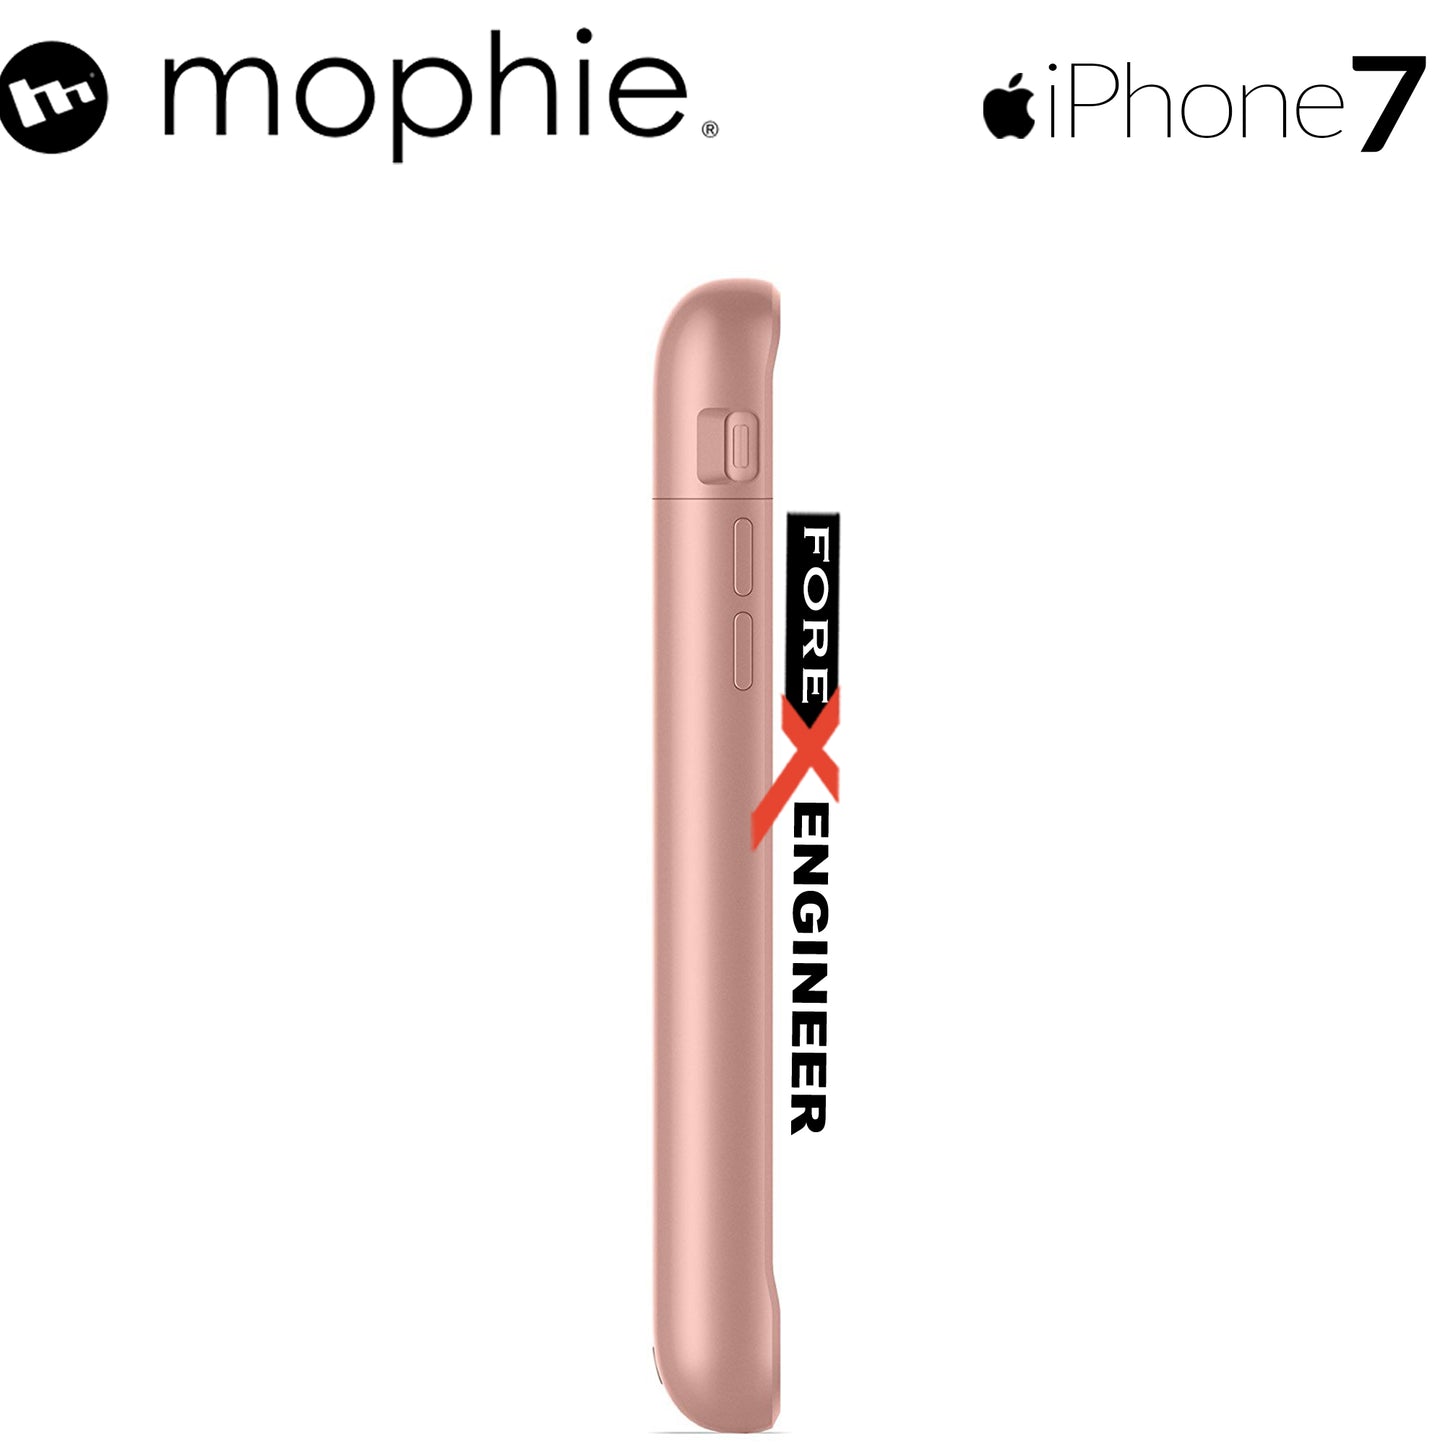 Mophie Juice Pack air for iphone 7 - 8 - rose gold color (wireless charge capable) (Compatible with iPhone SE 2nd Gen 2020)